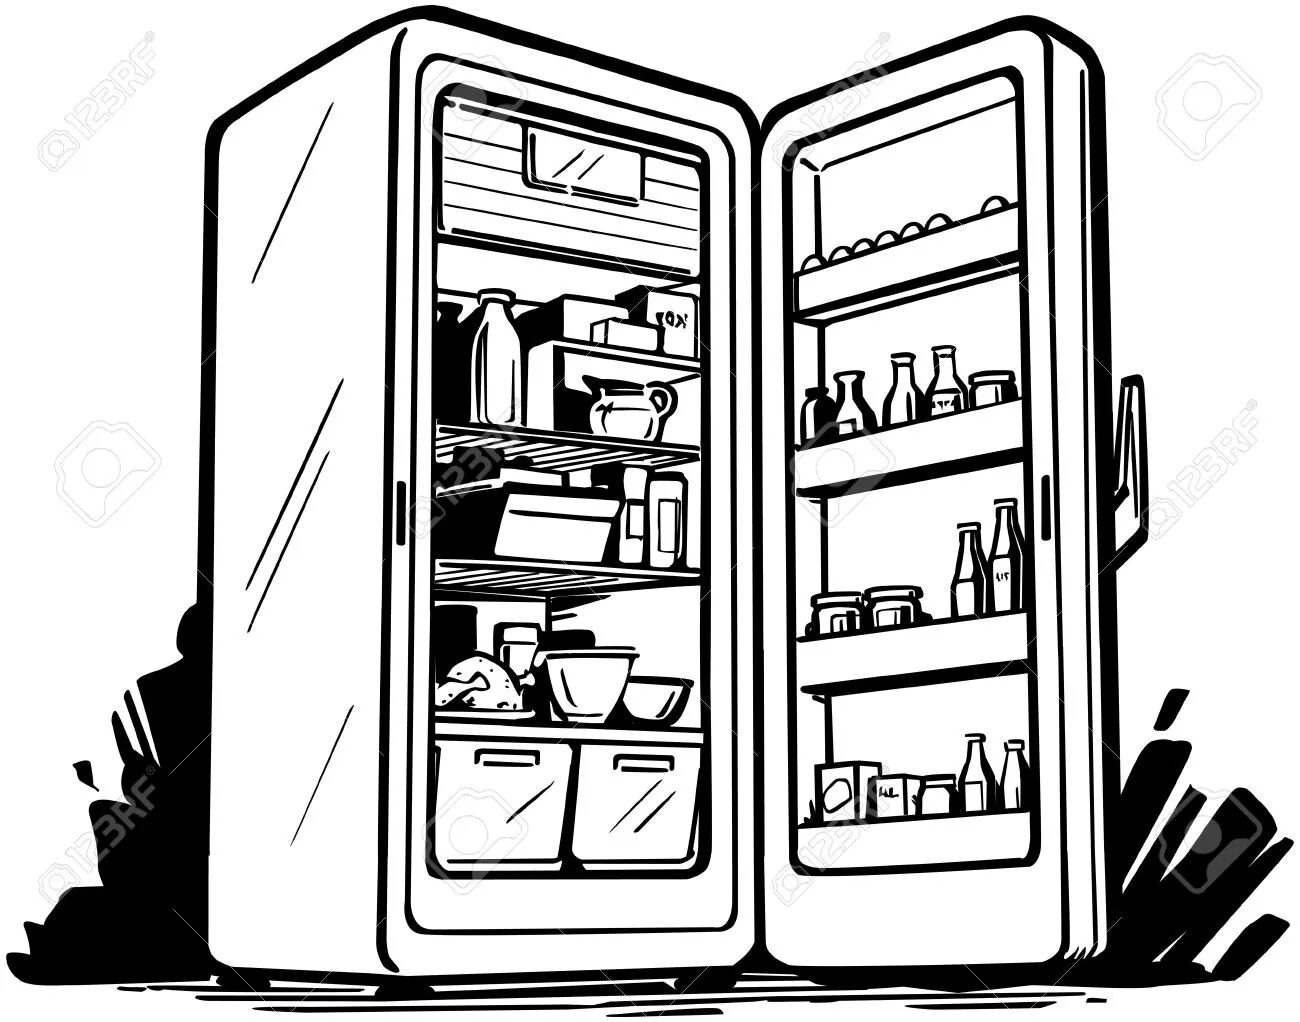 Innovative refrigerator open coloring page